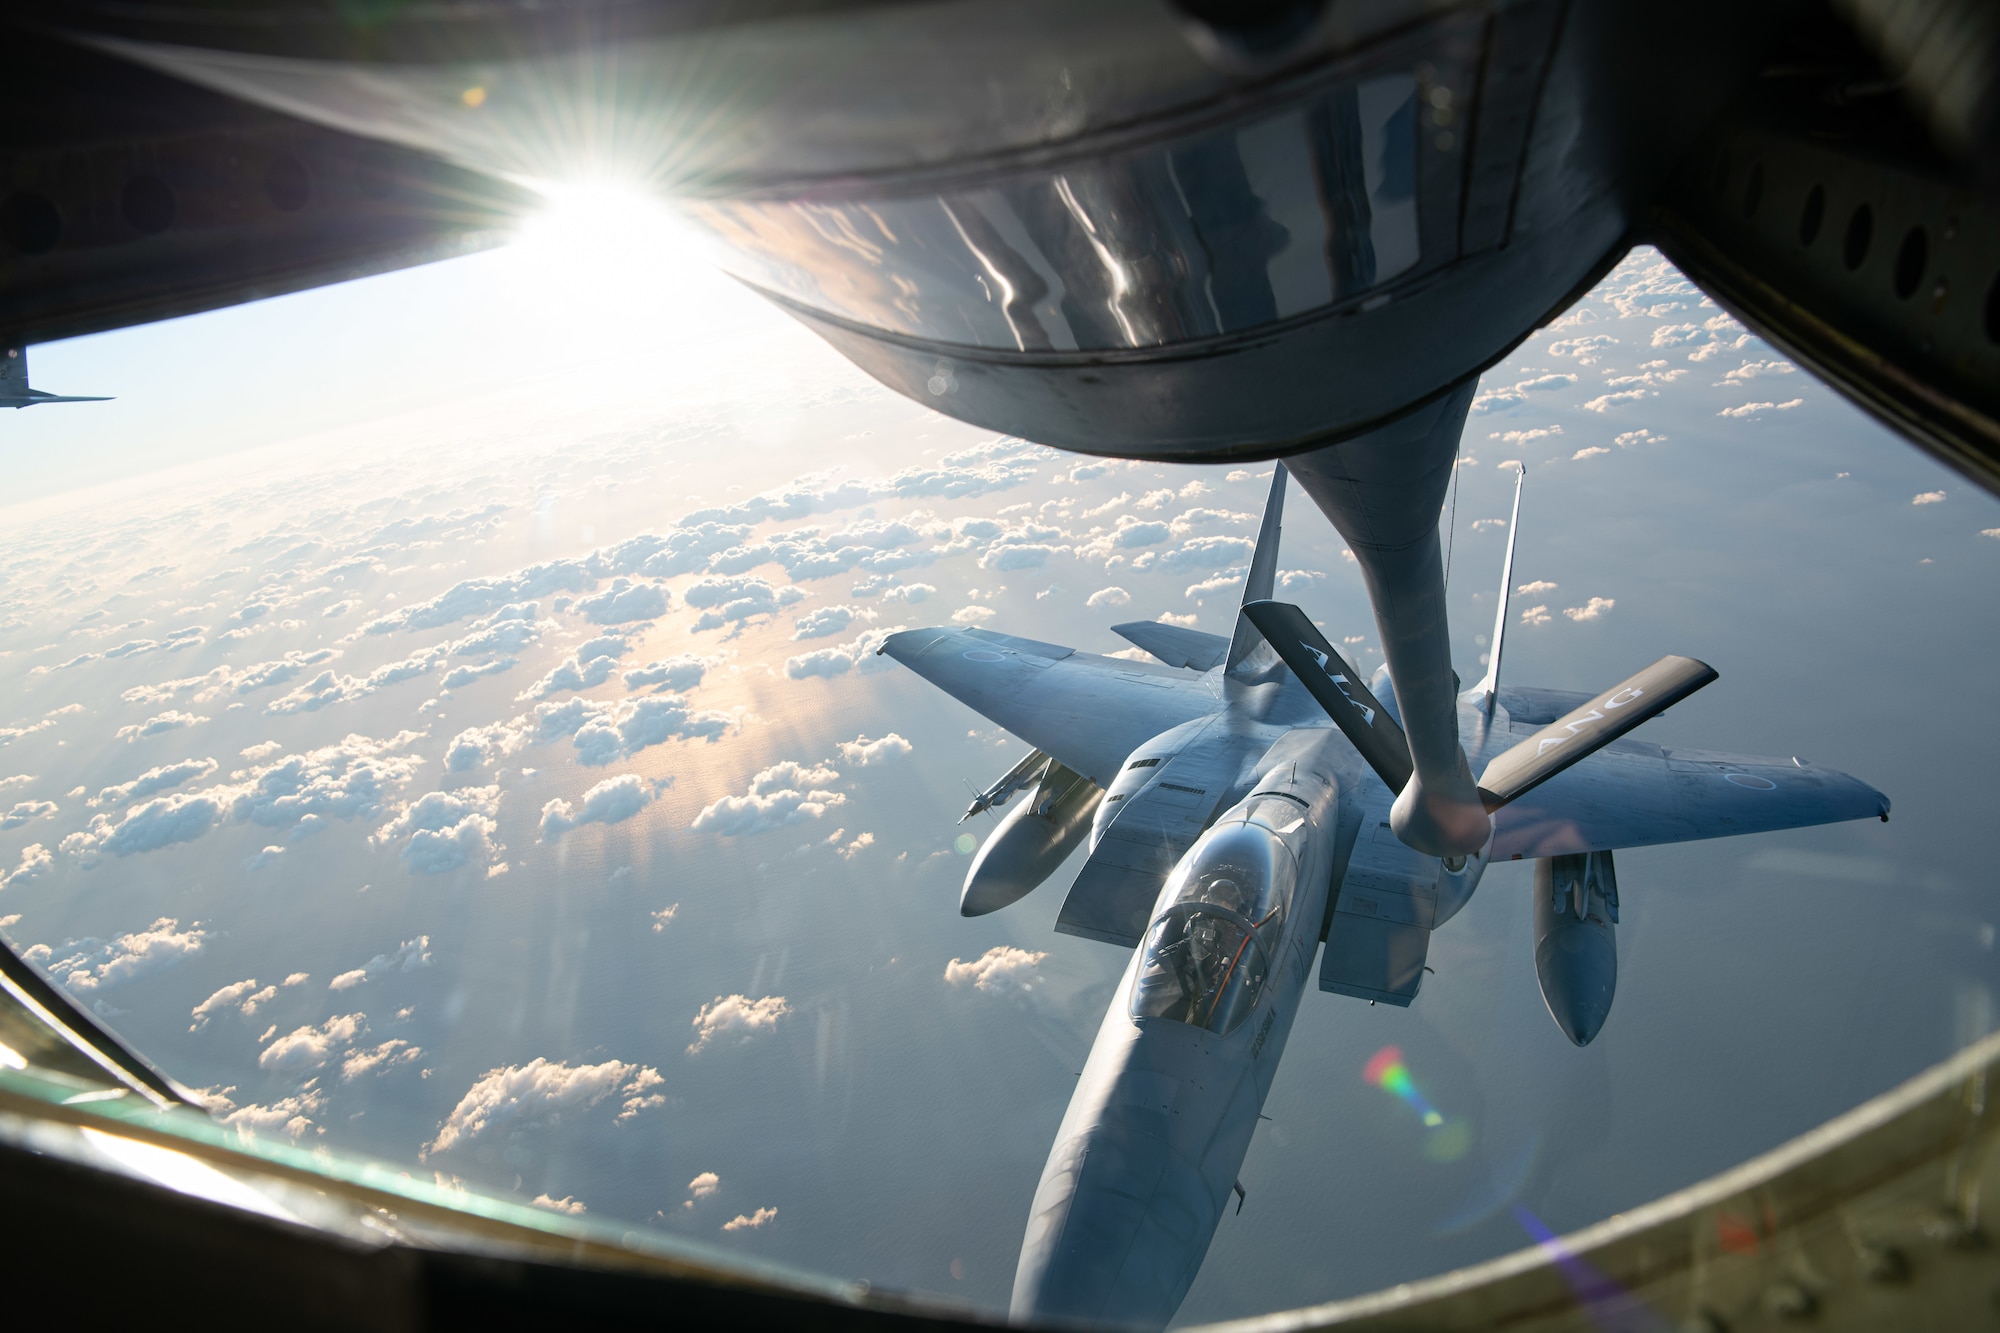 A U.S. Air Force KC-135 Stratotanker from the 909th Air Refueling Squadron refuels a Japan Air Self-Defense Force F-15J Eagle over the Pacific Ocean during Exercise Southern Beach, Oct. 28, 2021. Bilateral training exercises like Southern Beach help build trusting relationships among foreign and domestic forces, ensuring allies are able to come together to effectively respond to demanding scenarios and execute high-end missions in defense of a free and open Indo-Pacific region.